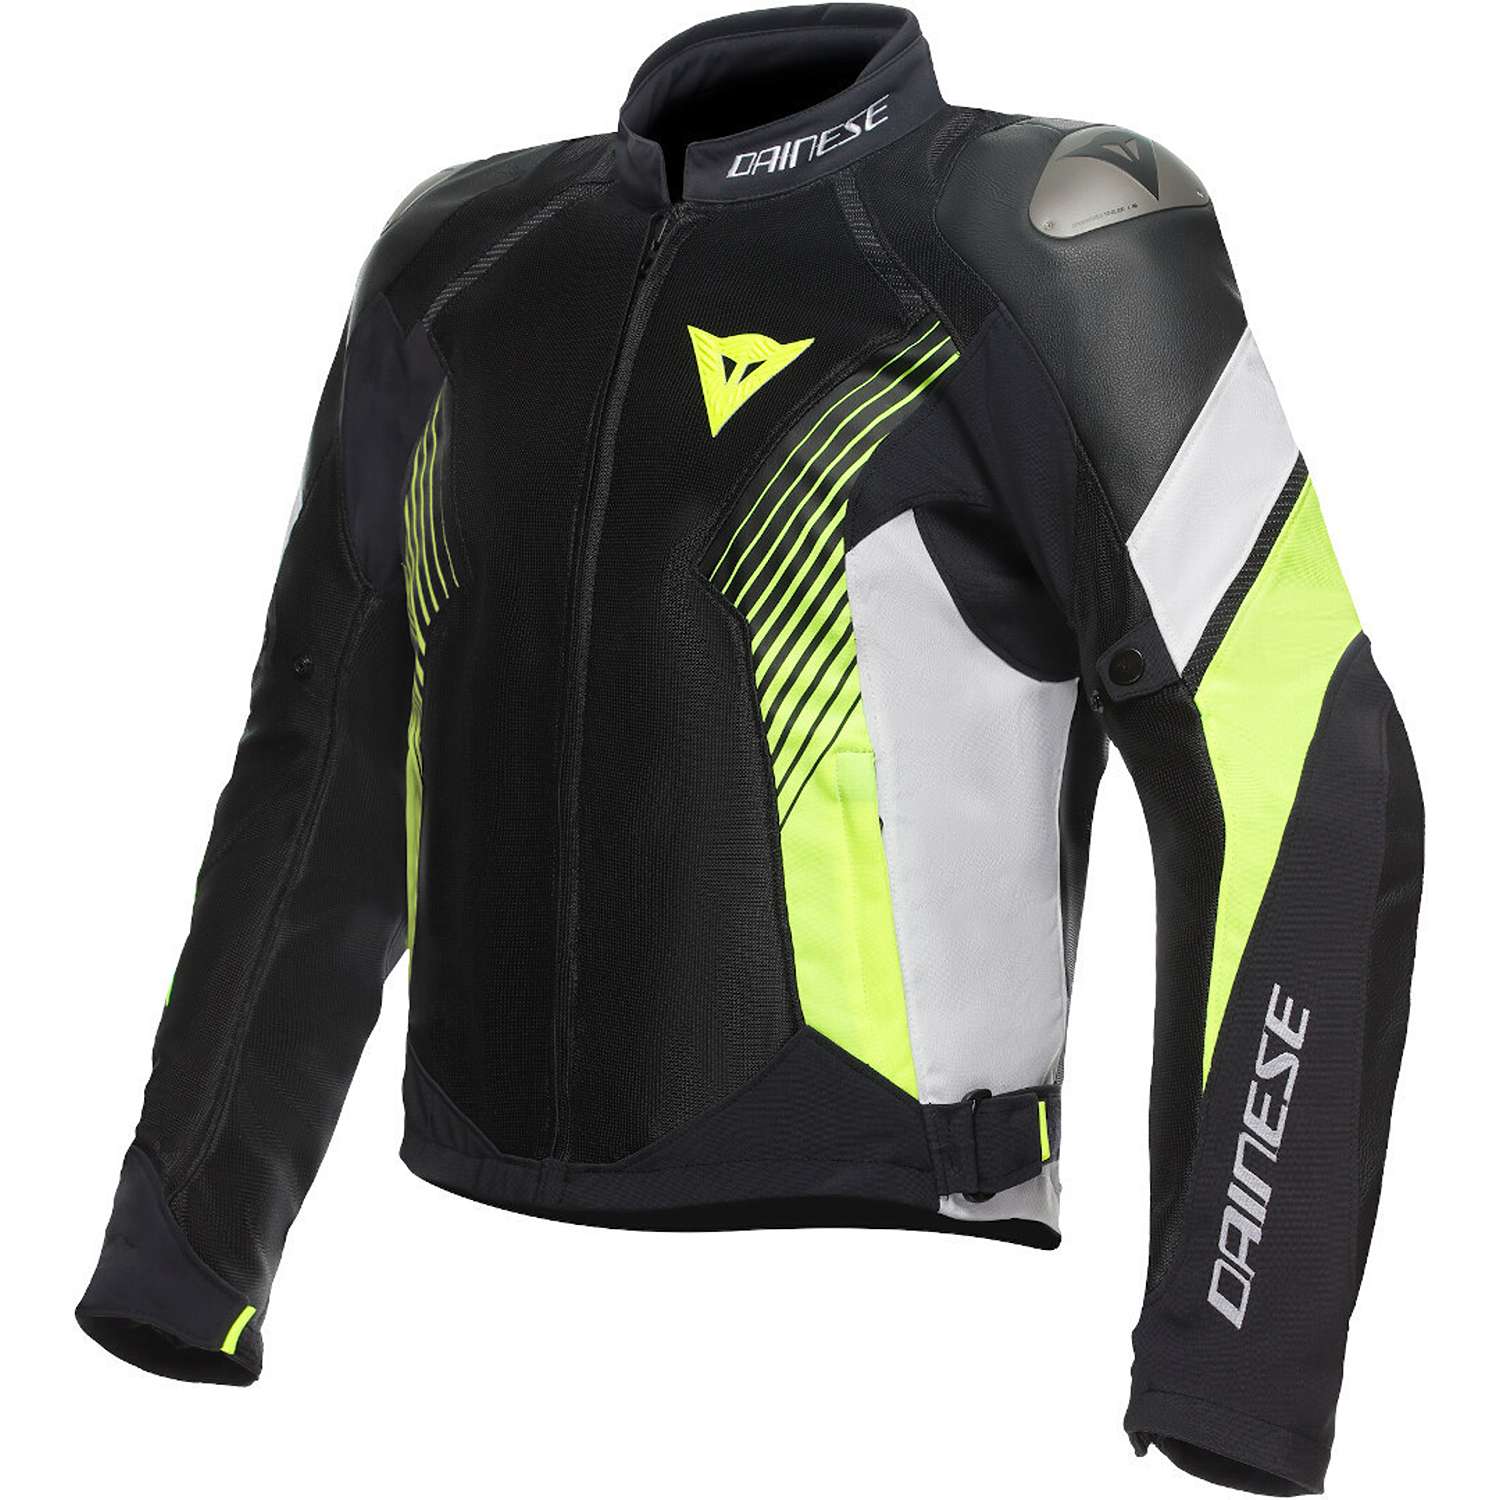 Image of EU Dainese Super Rider 2 Absoluteshell Jacket Black White Fluo Yellow Taille 58